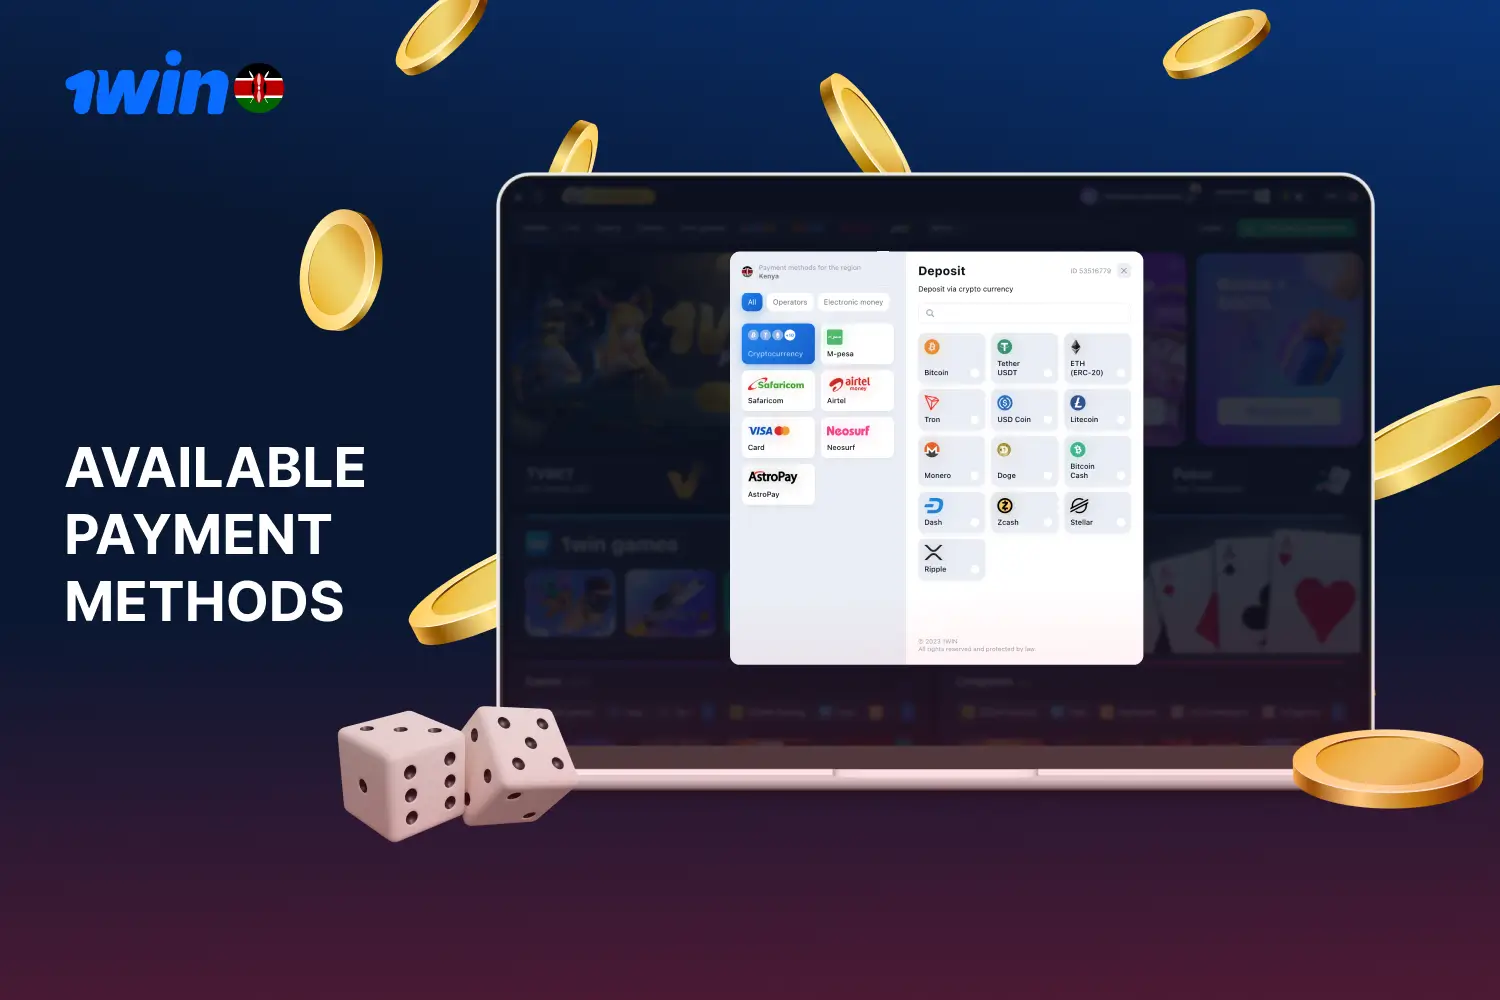 There are several payment methods available to 1win players from Kenya